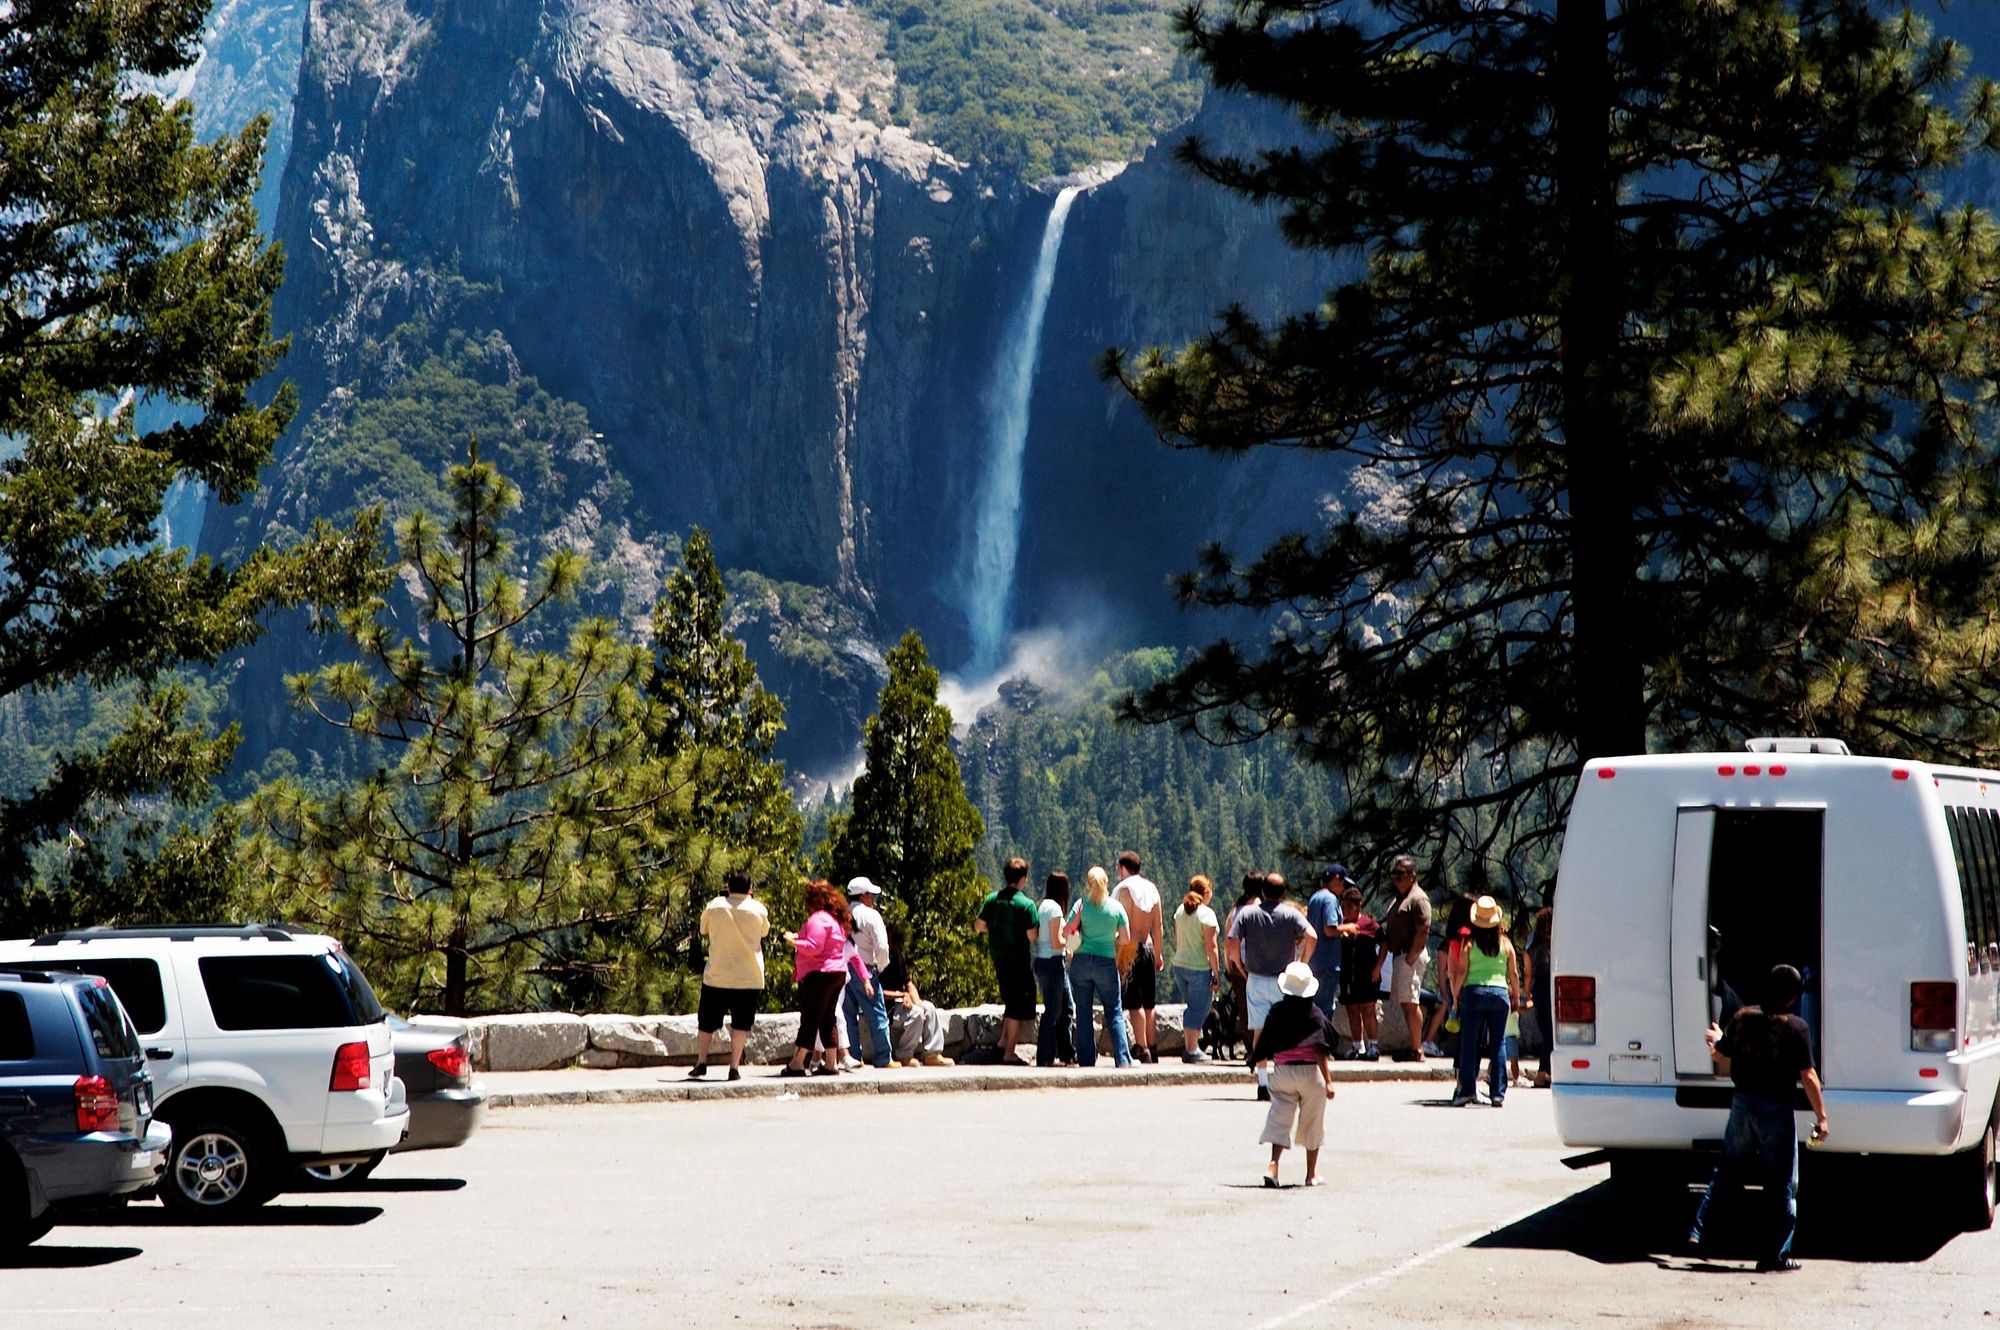 A busy lookout point at Yosemite National Park. Photo: Getty